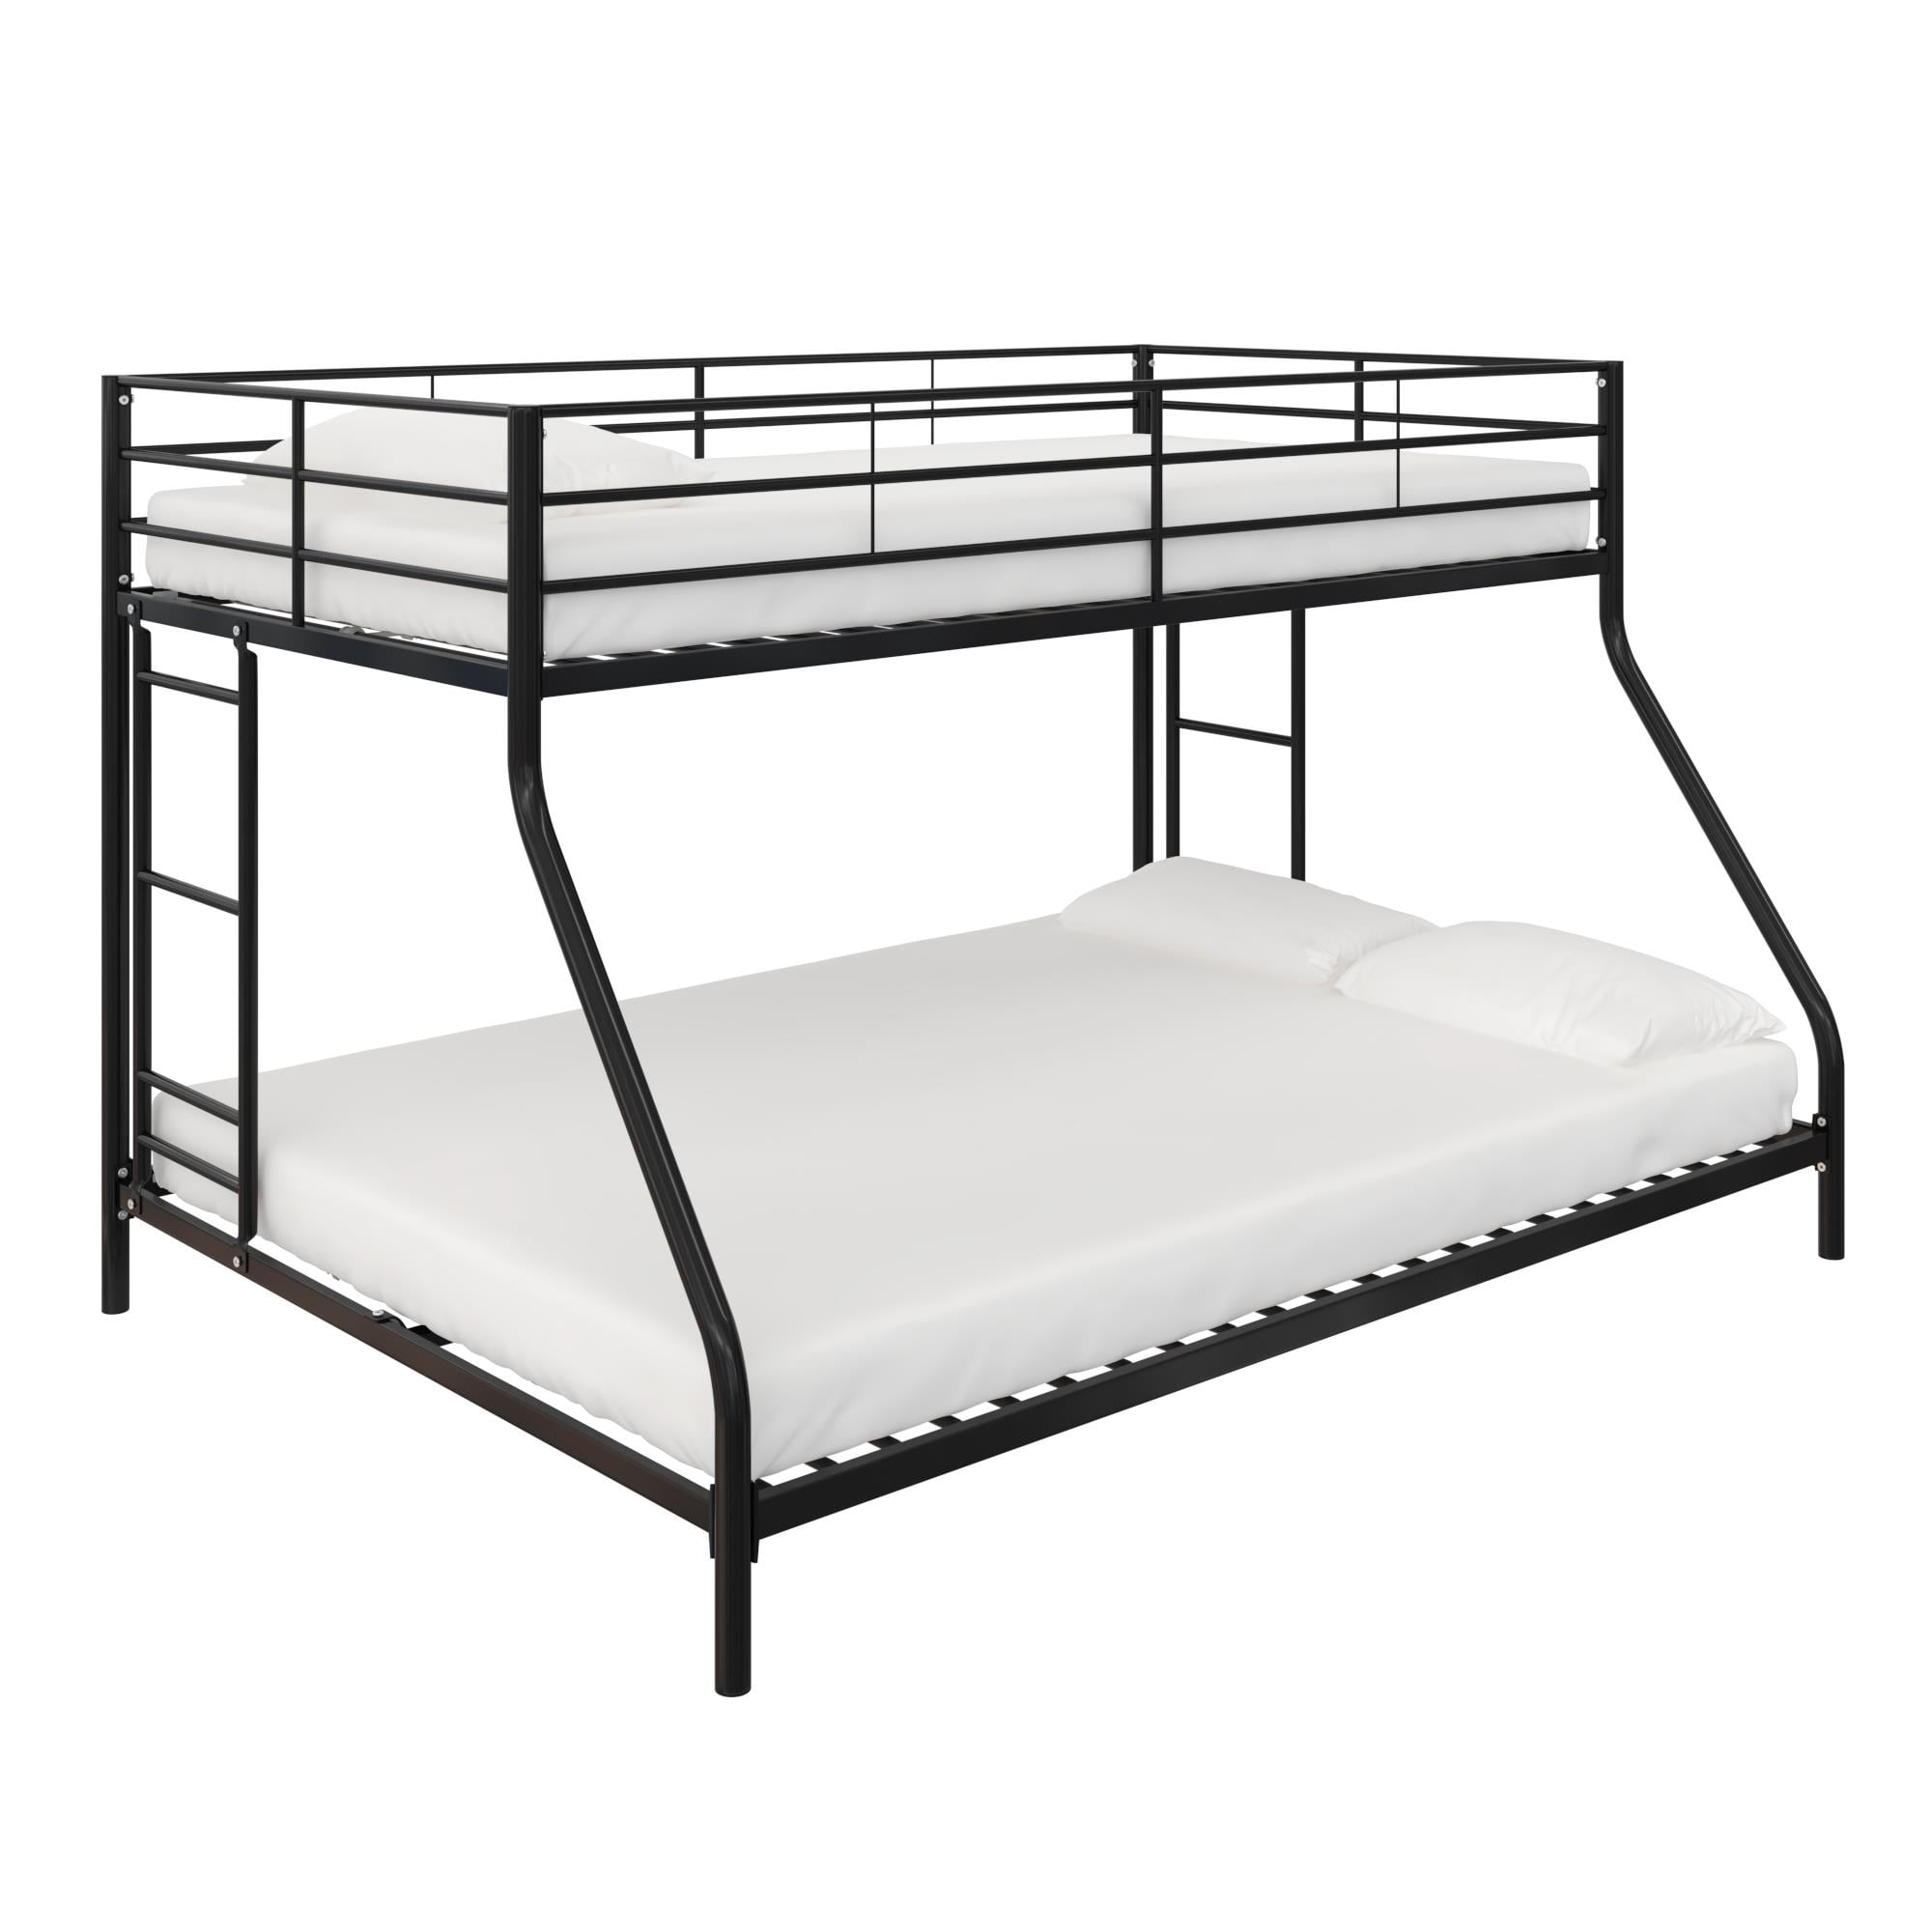 Space Junior Twin Over Full Bunk Bed, Mainstays Bunk Bed Twin Over Full Length